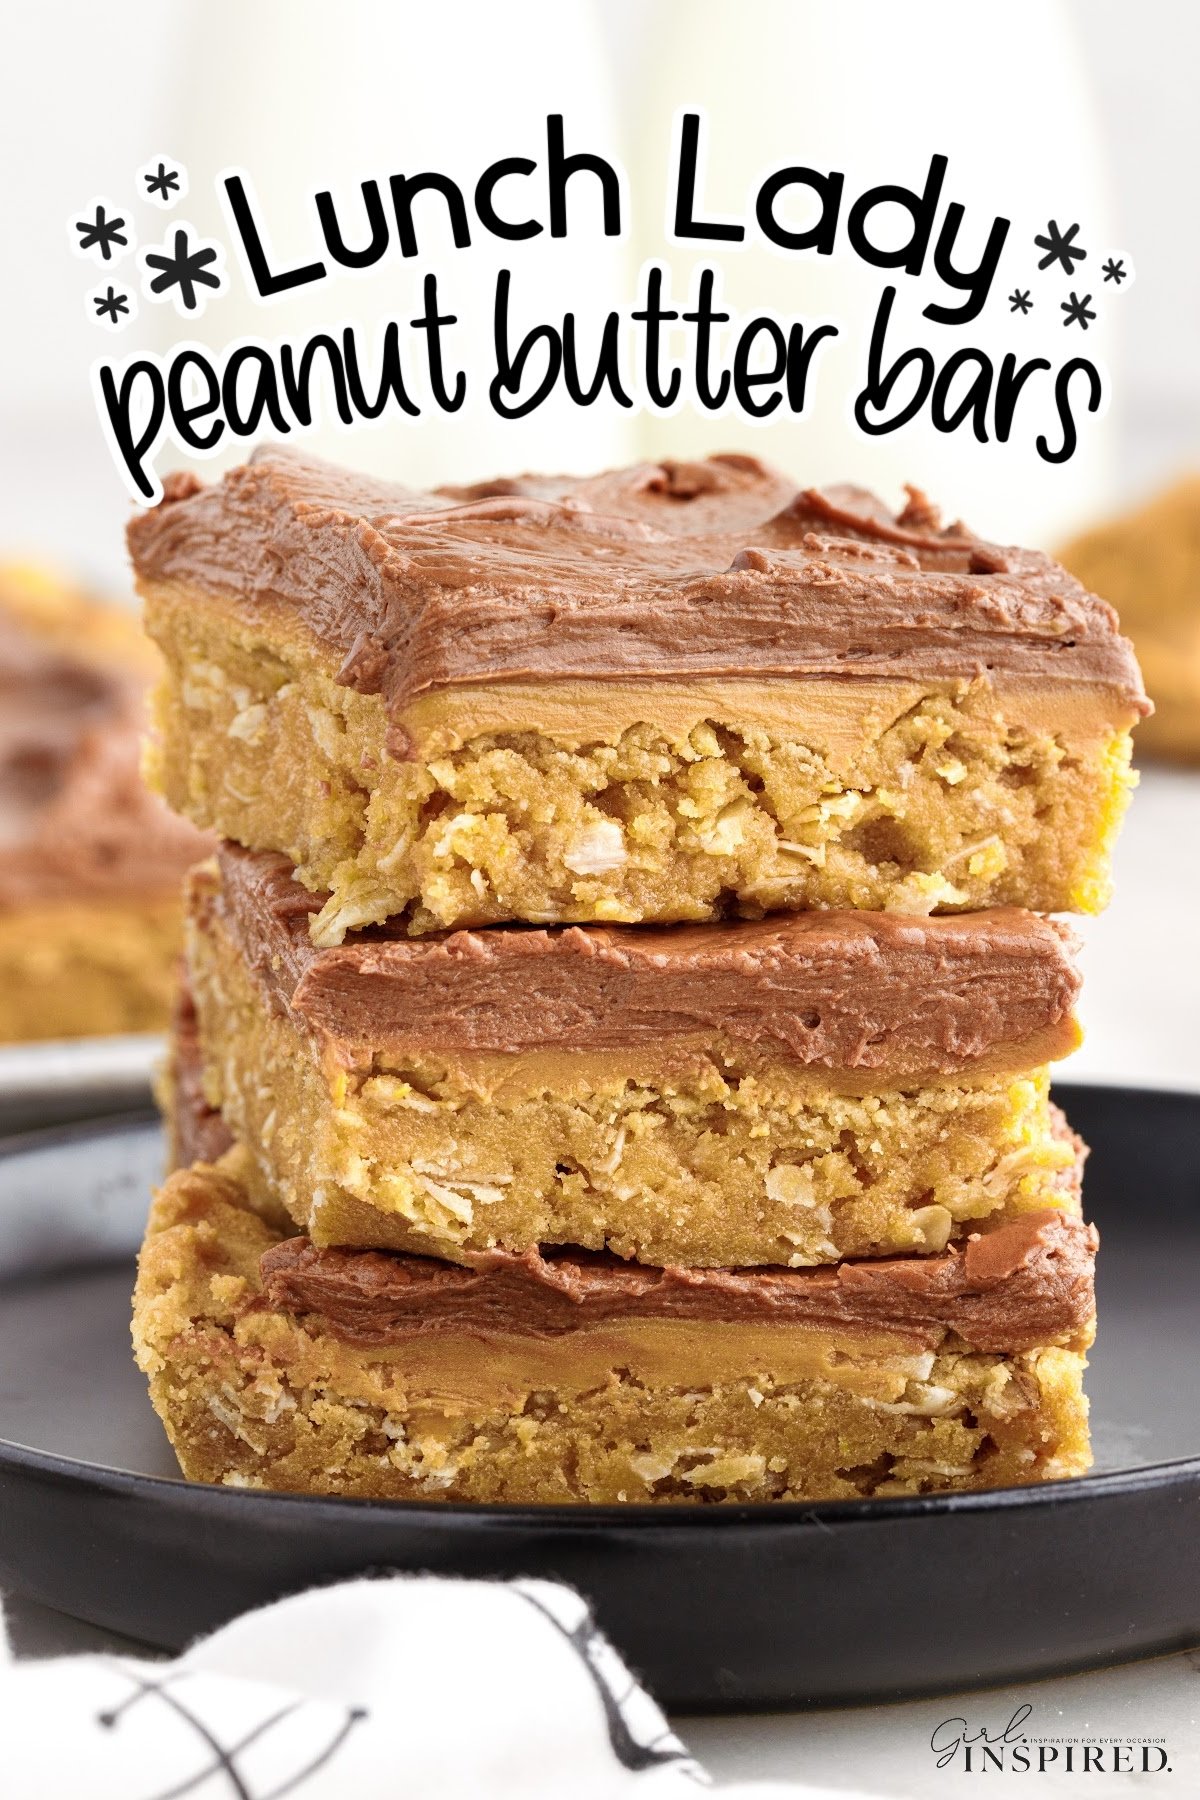 Three Lunch Lady Peanut Butter Bars stacked on each other with text overlay.